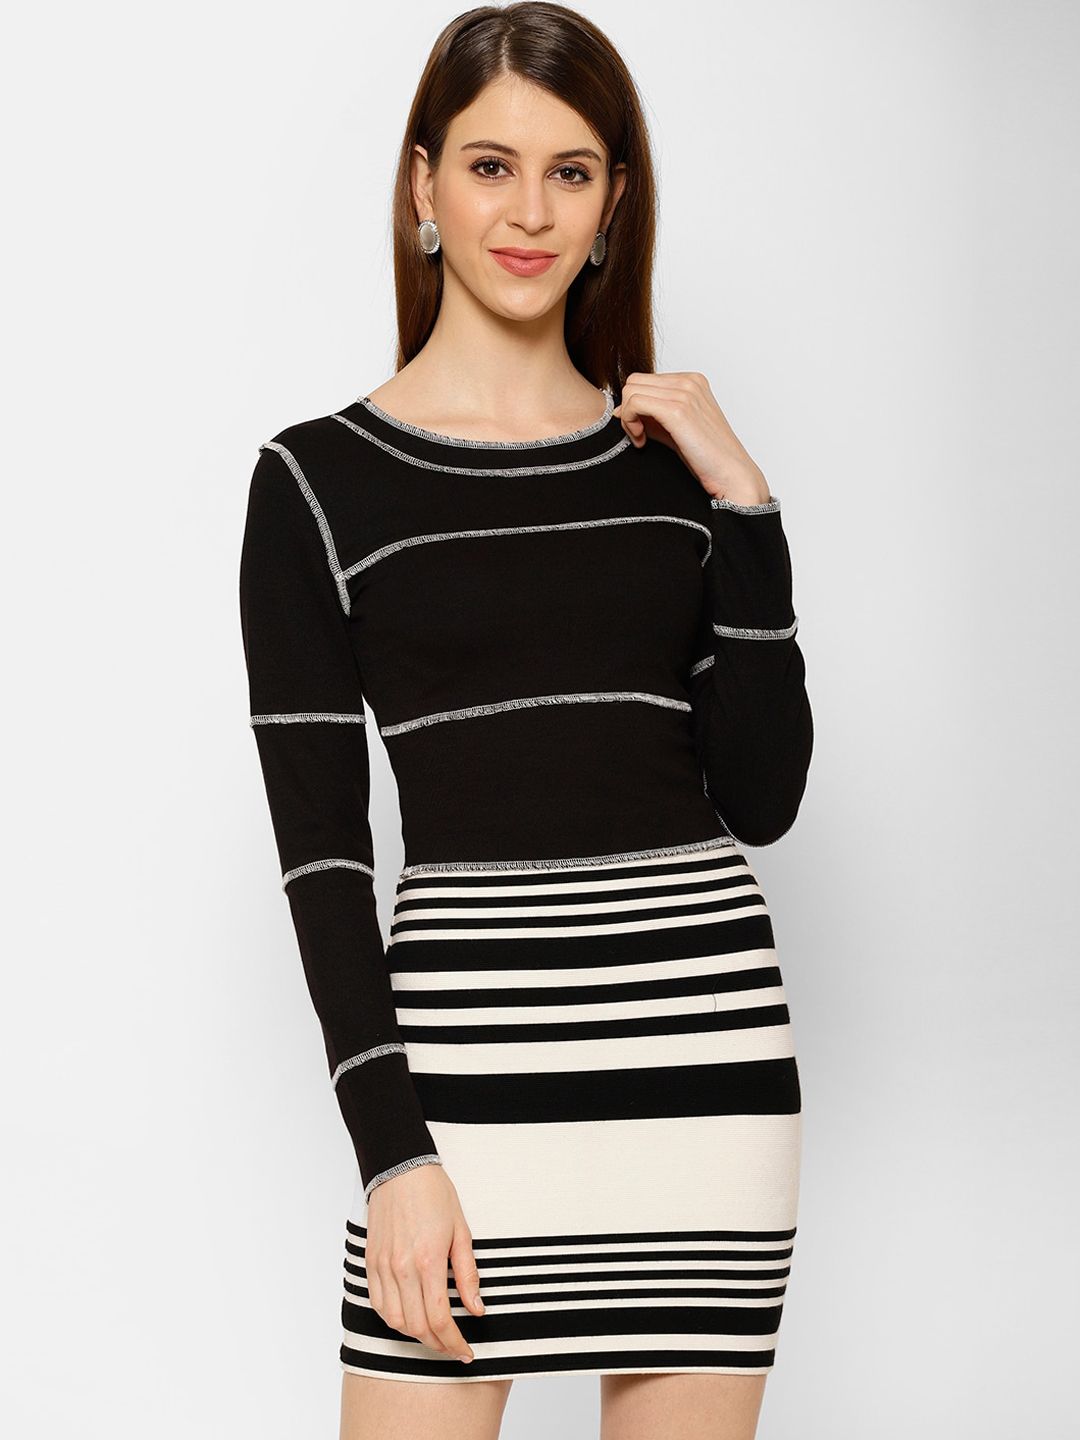 KASSUALLY Black Striped Knitted Pure Cotton Top